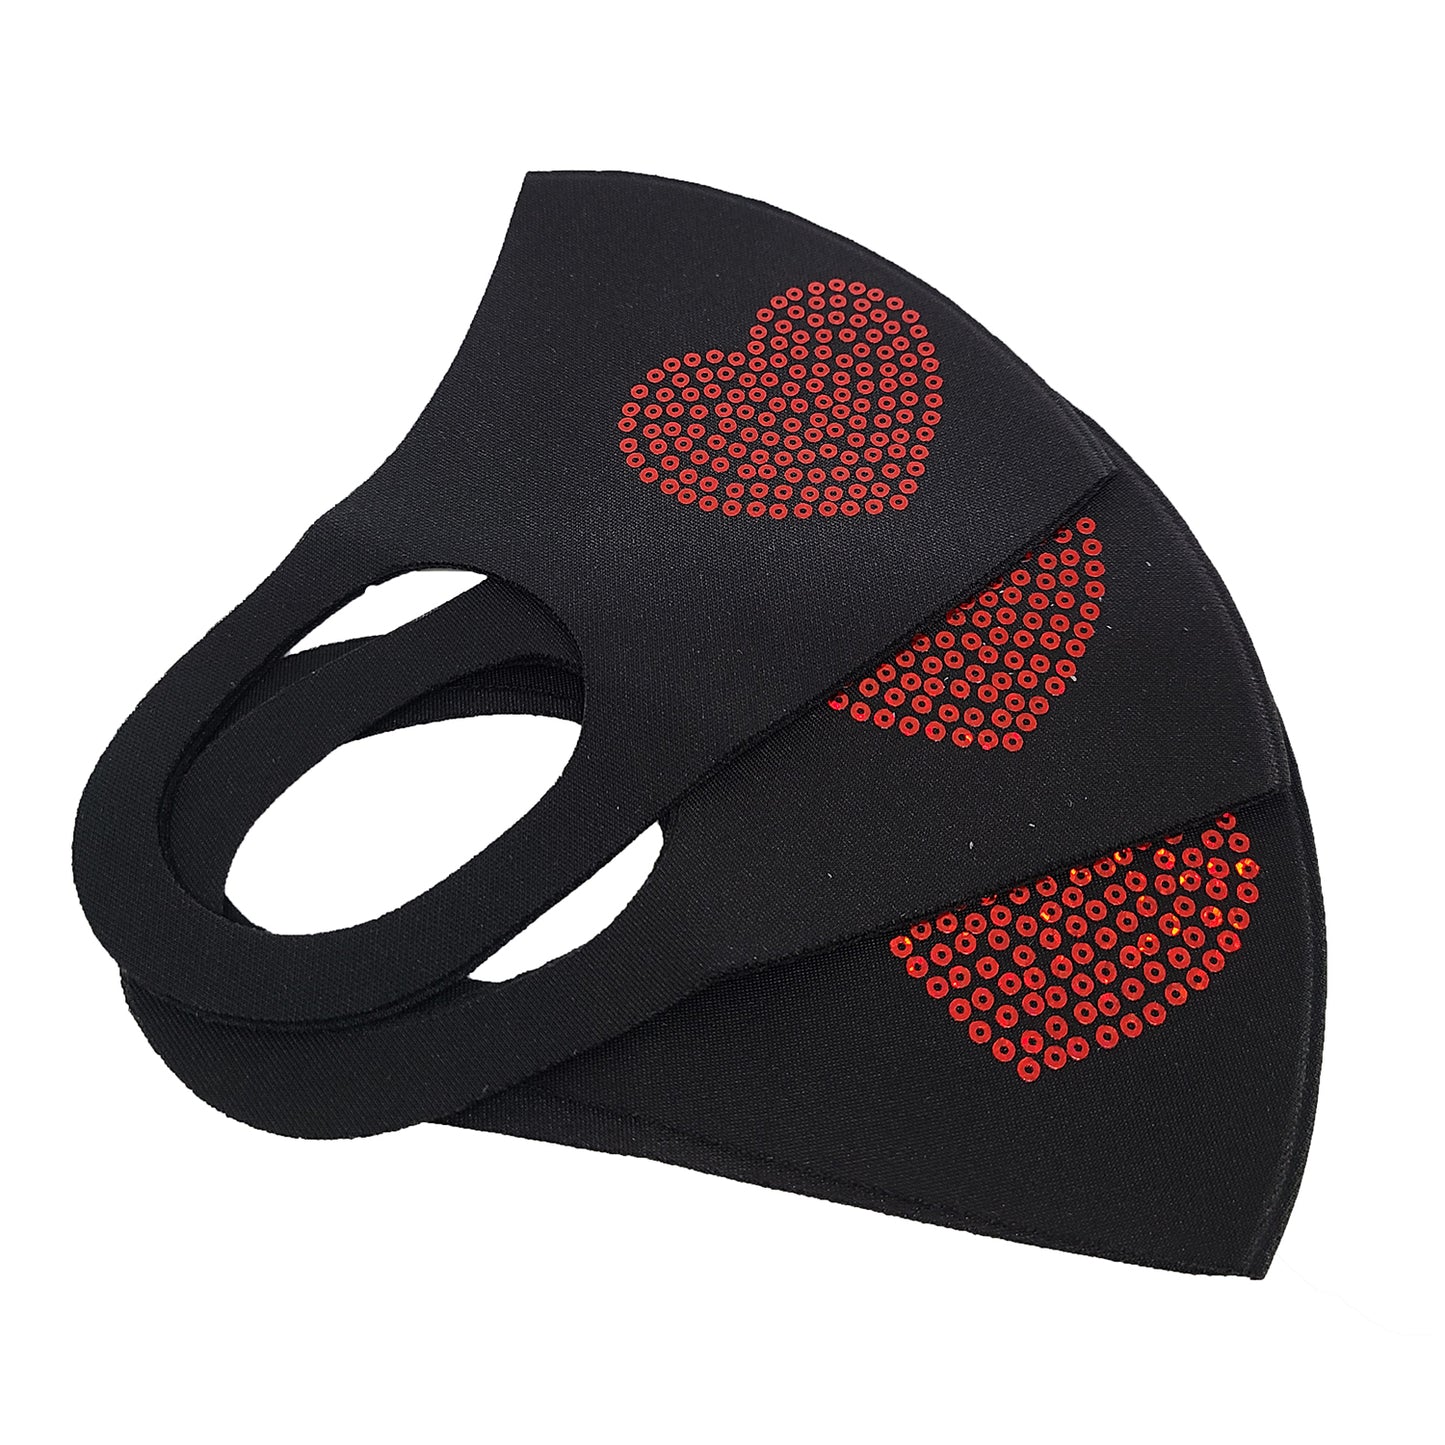 Reusable Fashion Face Mask high Quality Cotton "3-PACK"